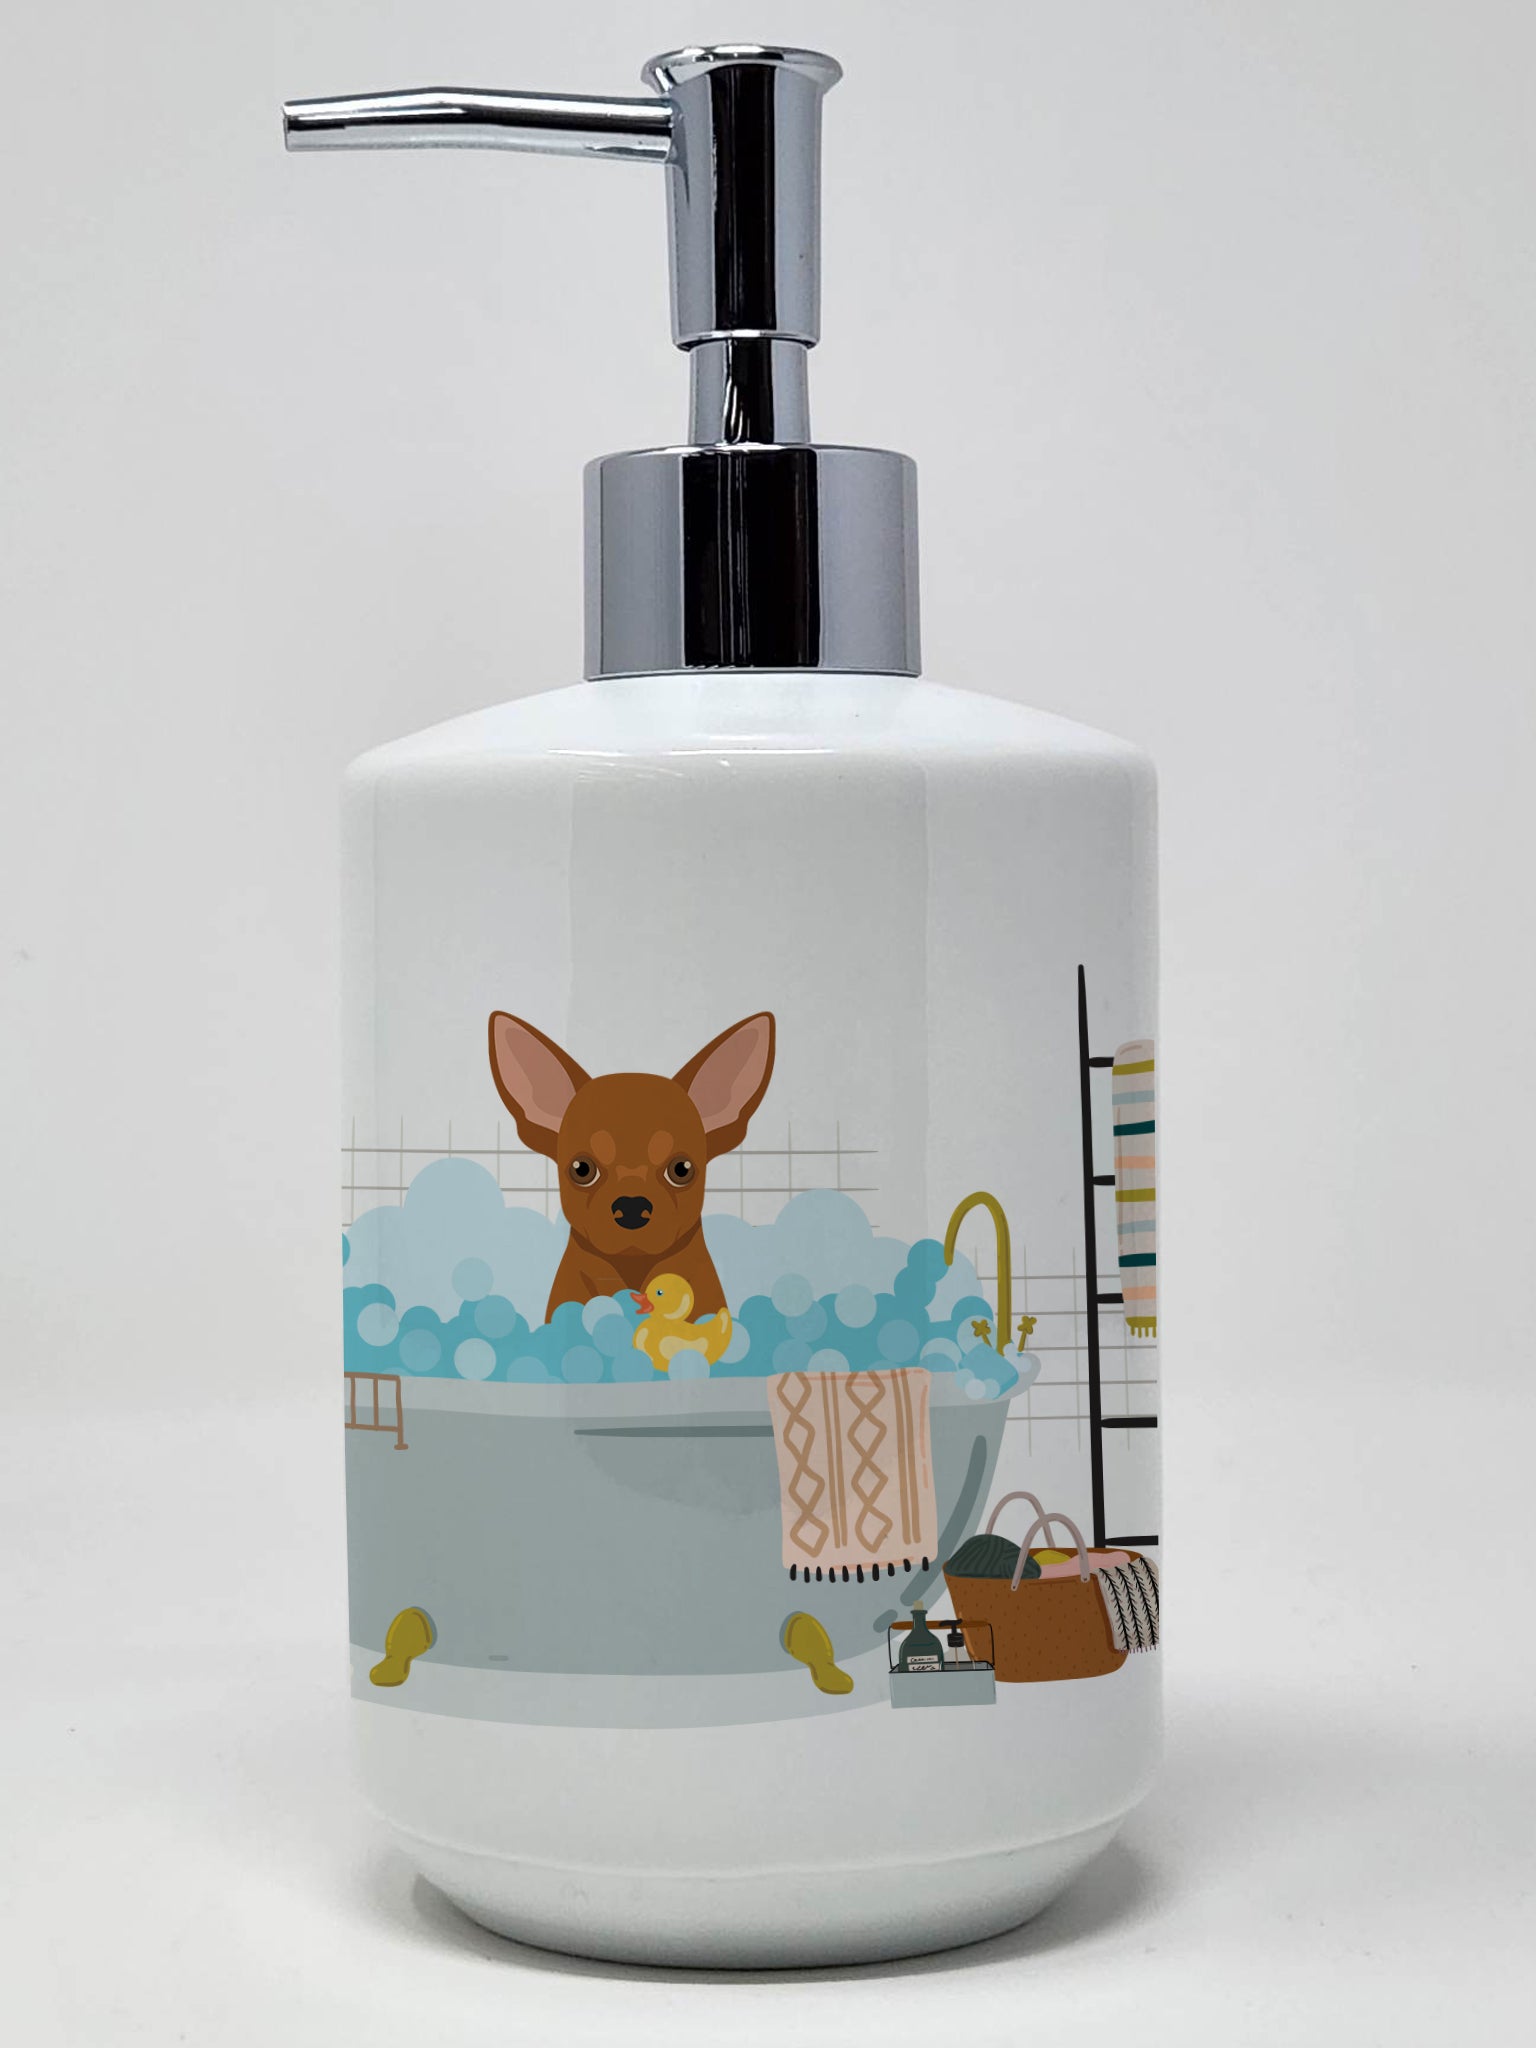 Buy this Red Chihuahua Ceramic Soap Dispenser